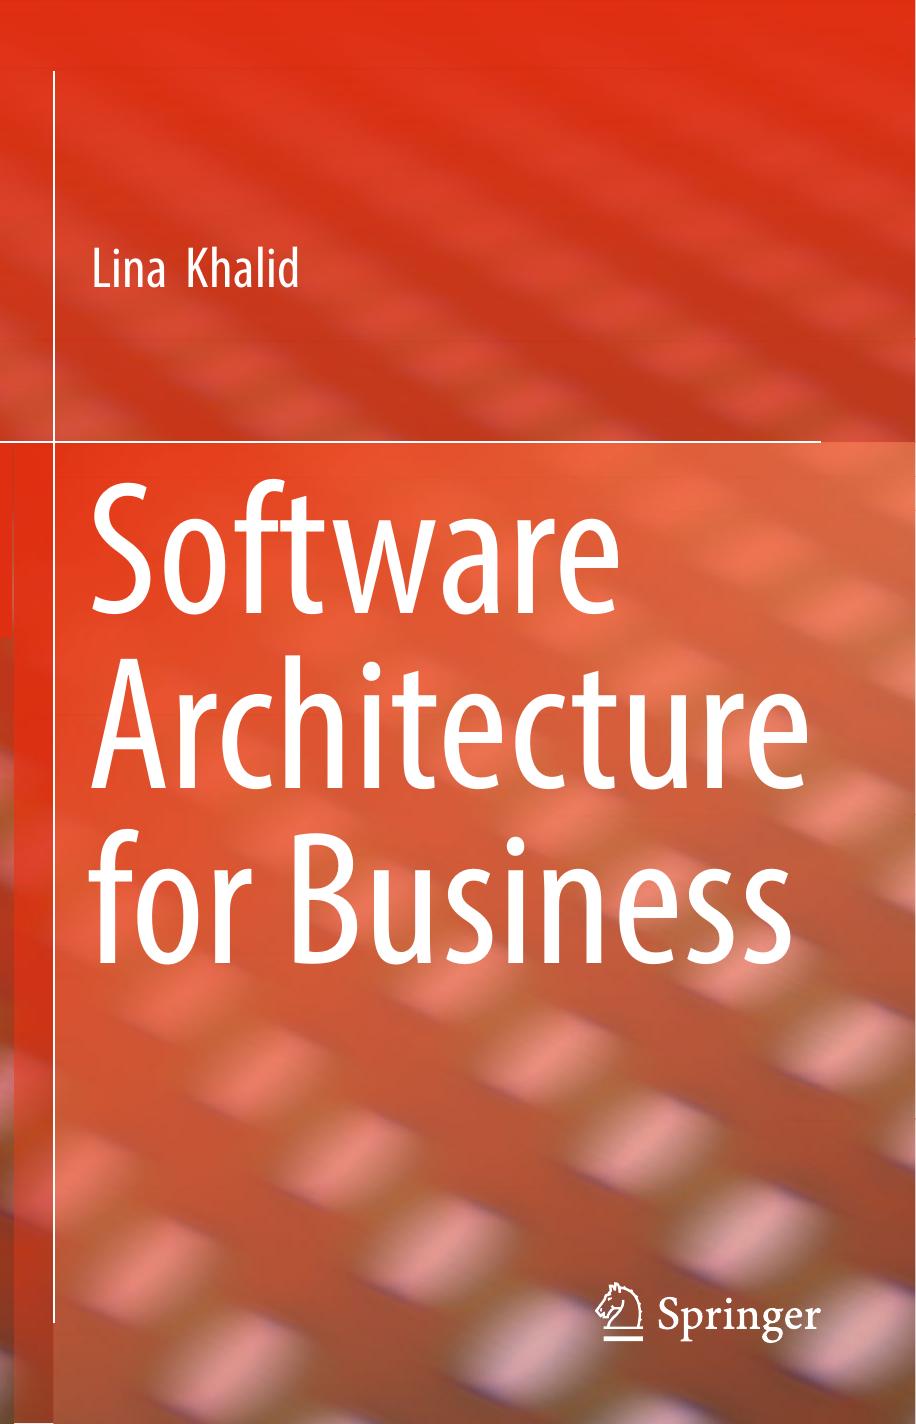 Software Architecture for Business